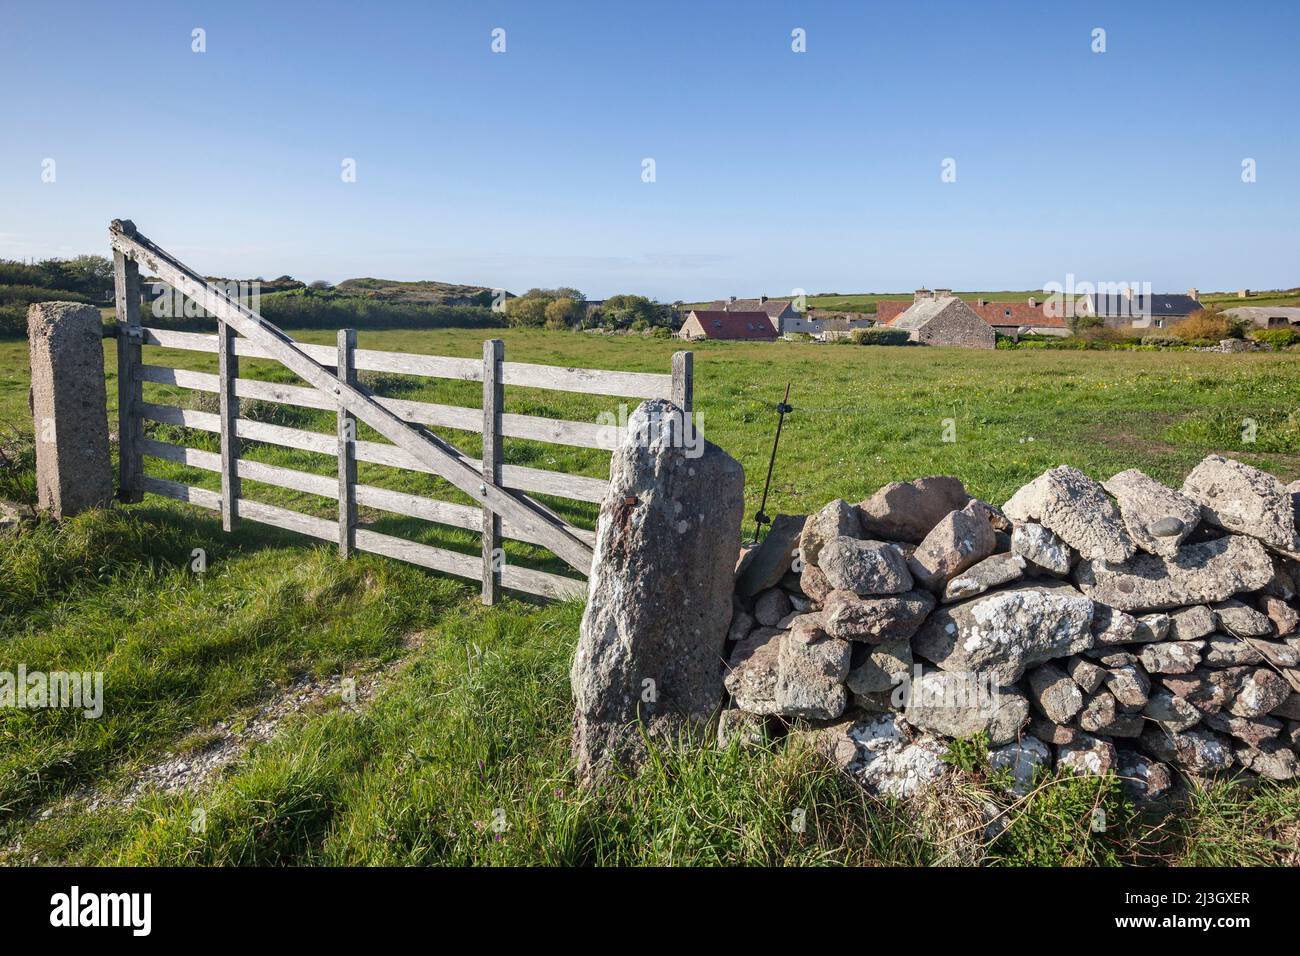 France, Manche, Cotentin, Cape Hague, Jobourg, bay of Ecalgrain, wooden gate, low stone wall and traditionnal stone houses in the background Stock Photo